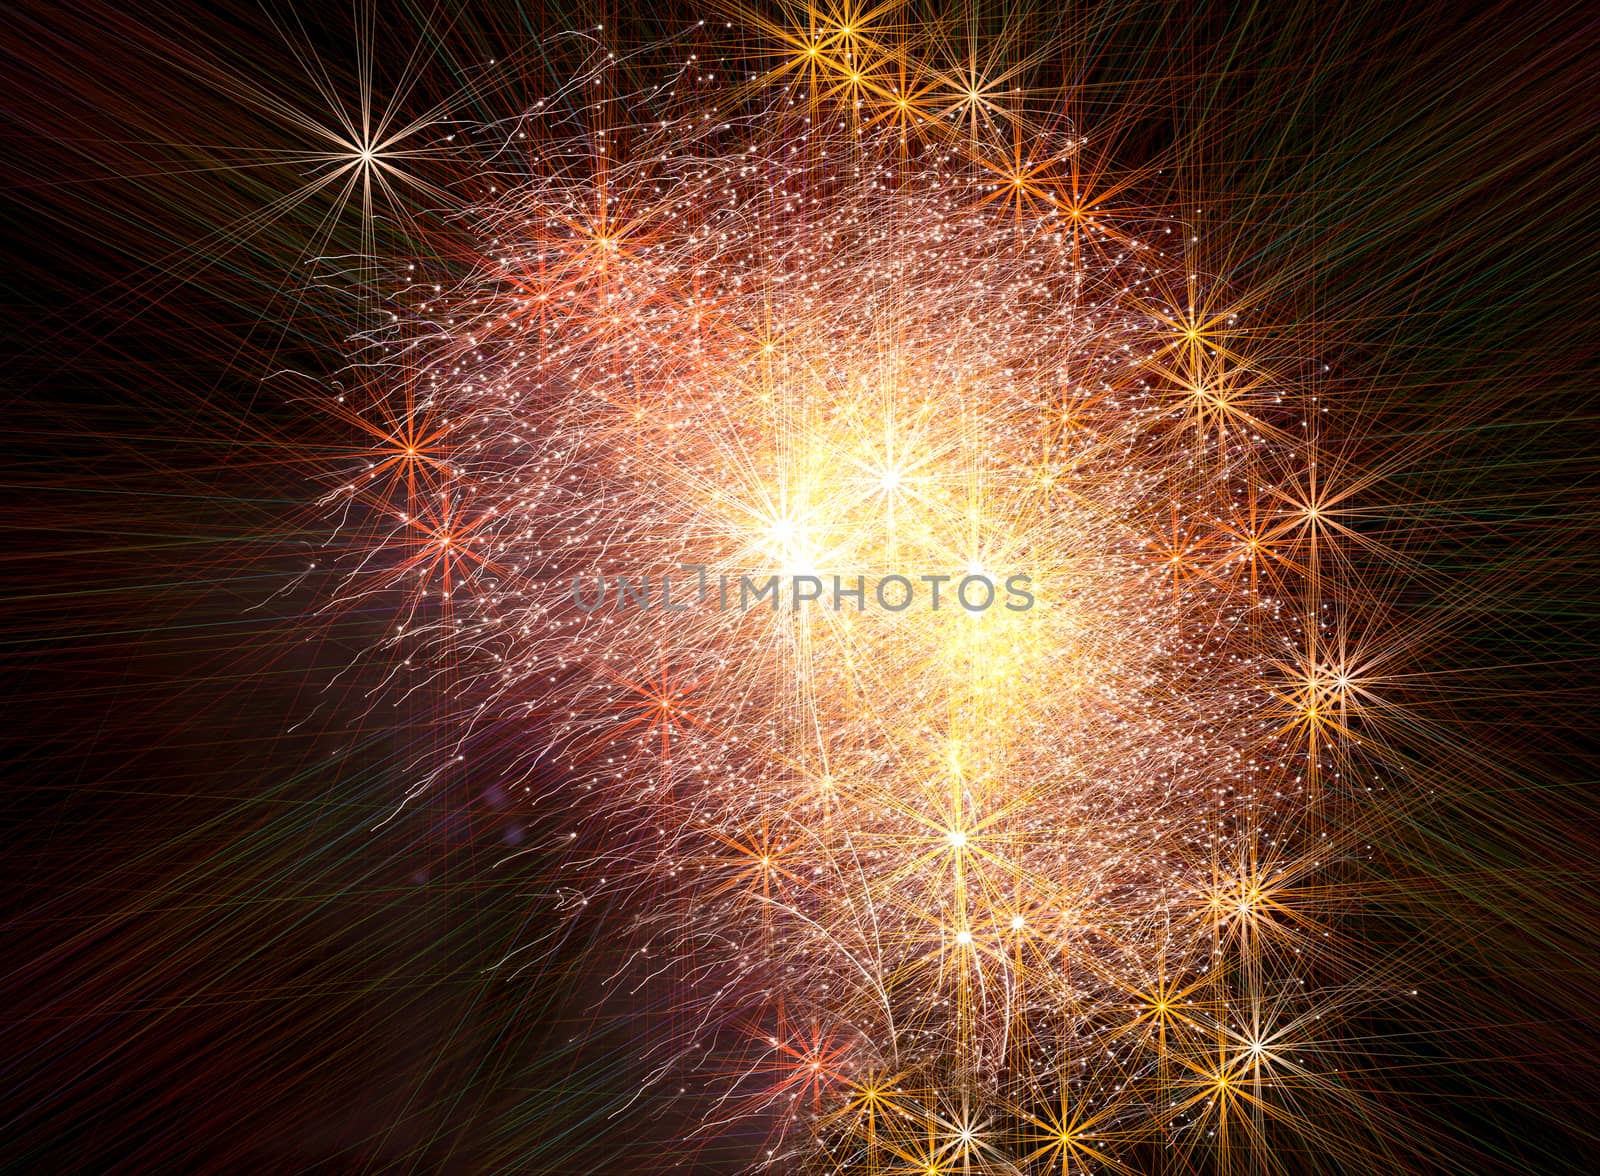 
Background as a shining star of fireworks in the night sky